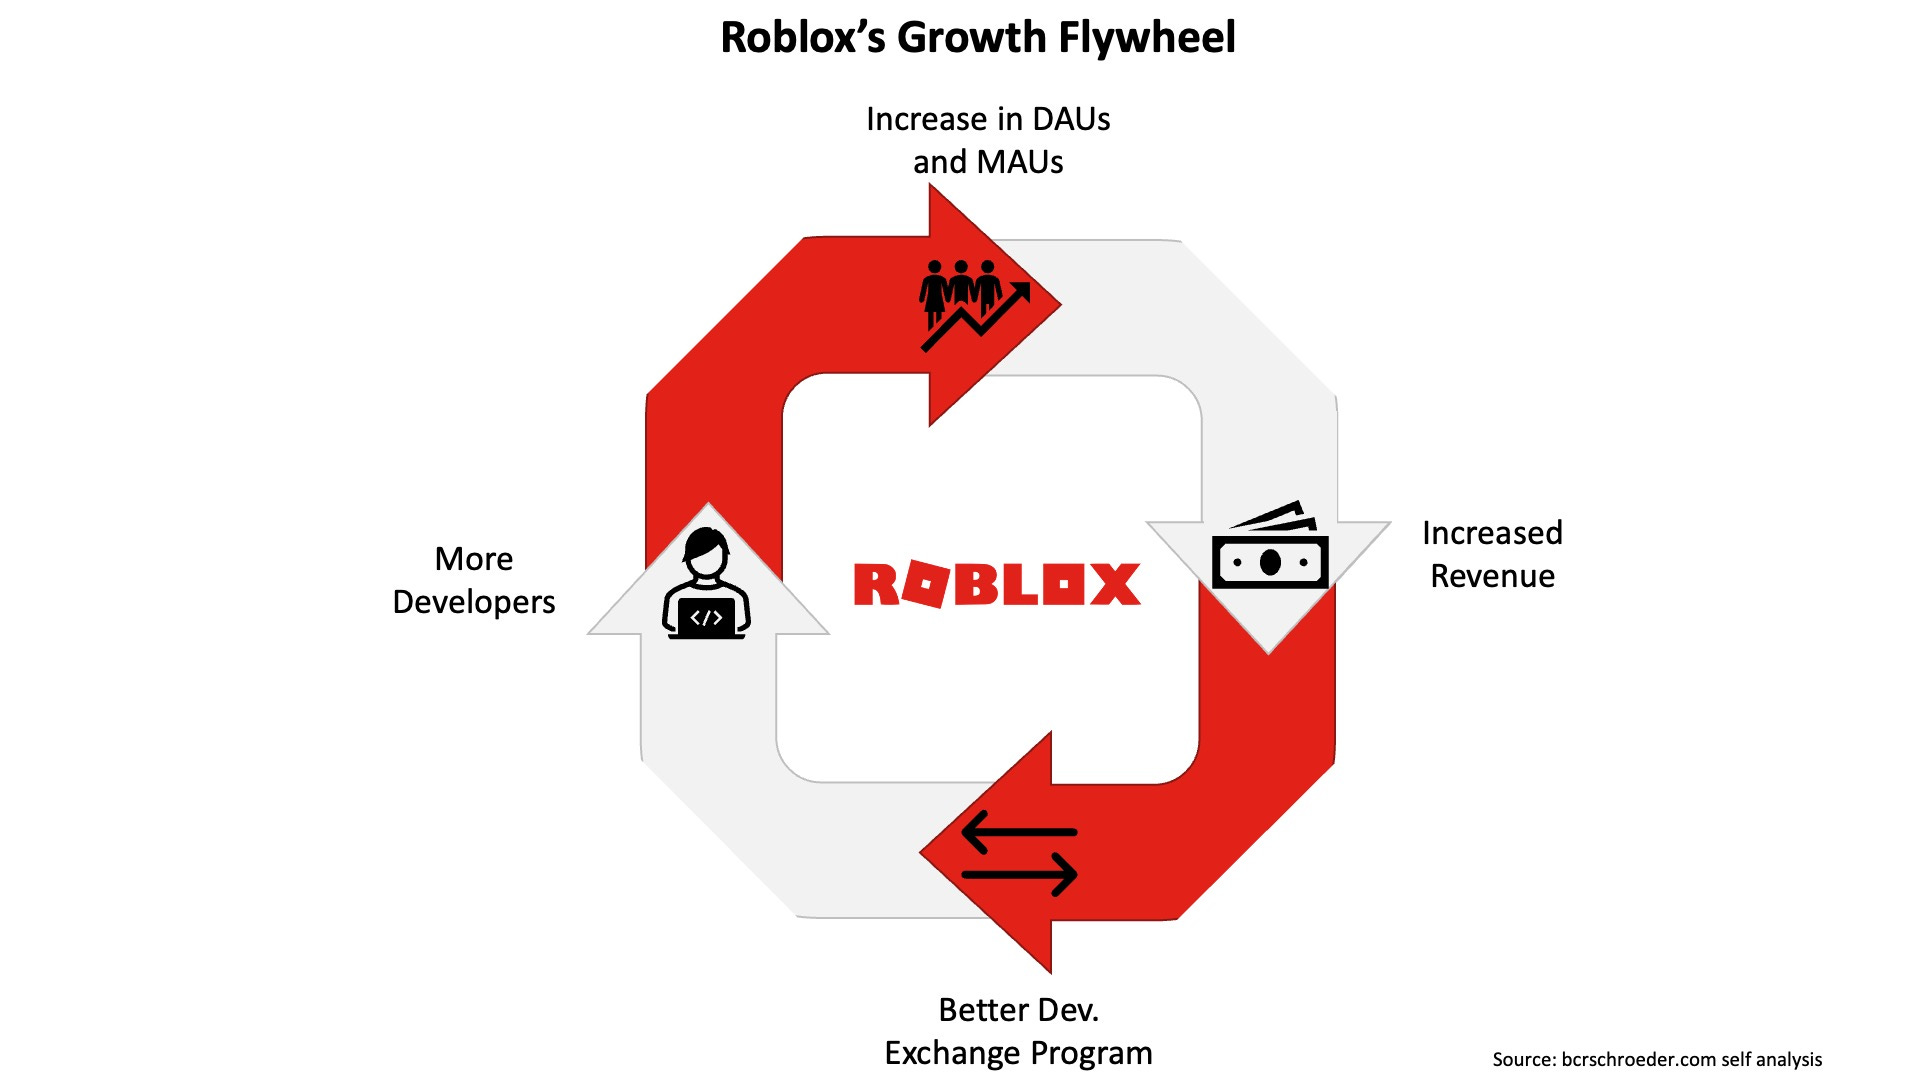 Roblox's virtual brand activations are building a robust creator economy